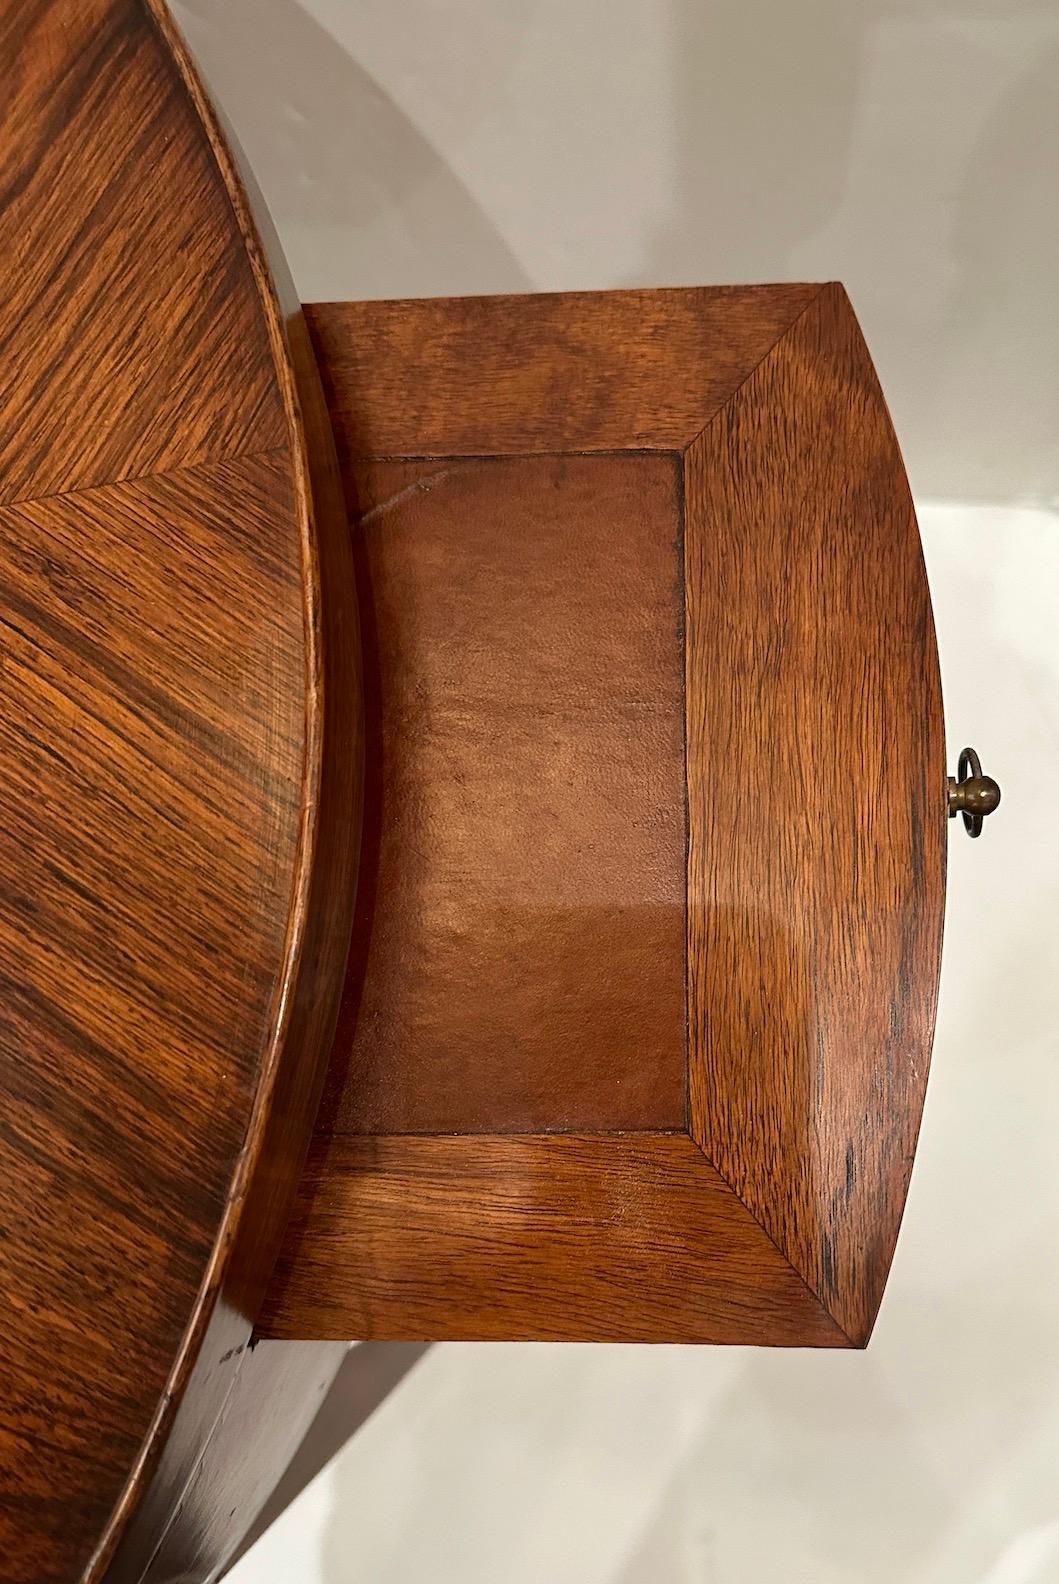 19th Century Parquetry and Marquetry Flip Top Table In Good Condition For Sale In Newport Beach, CA